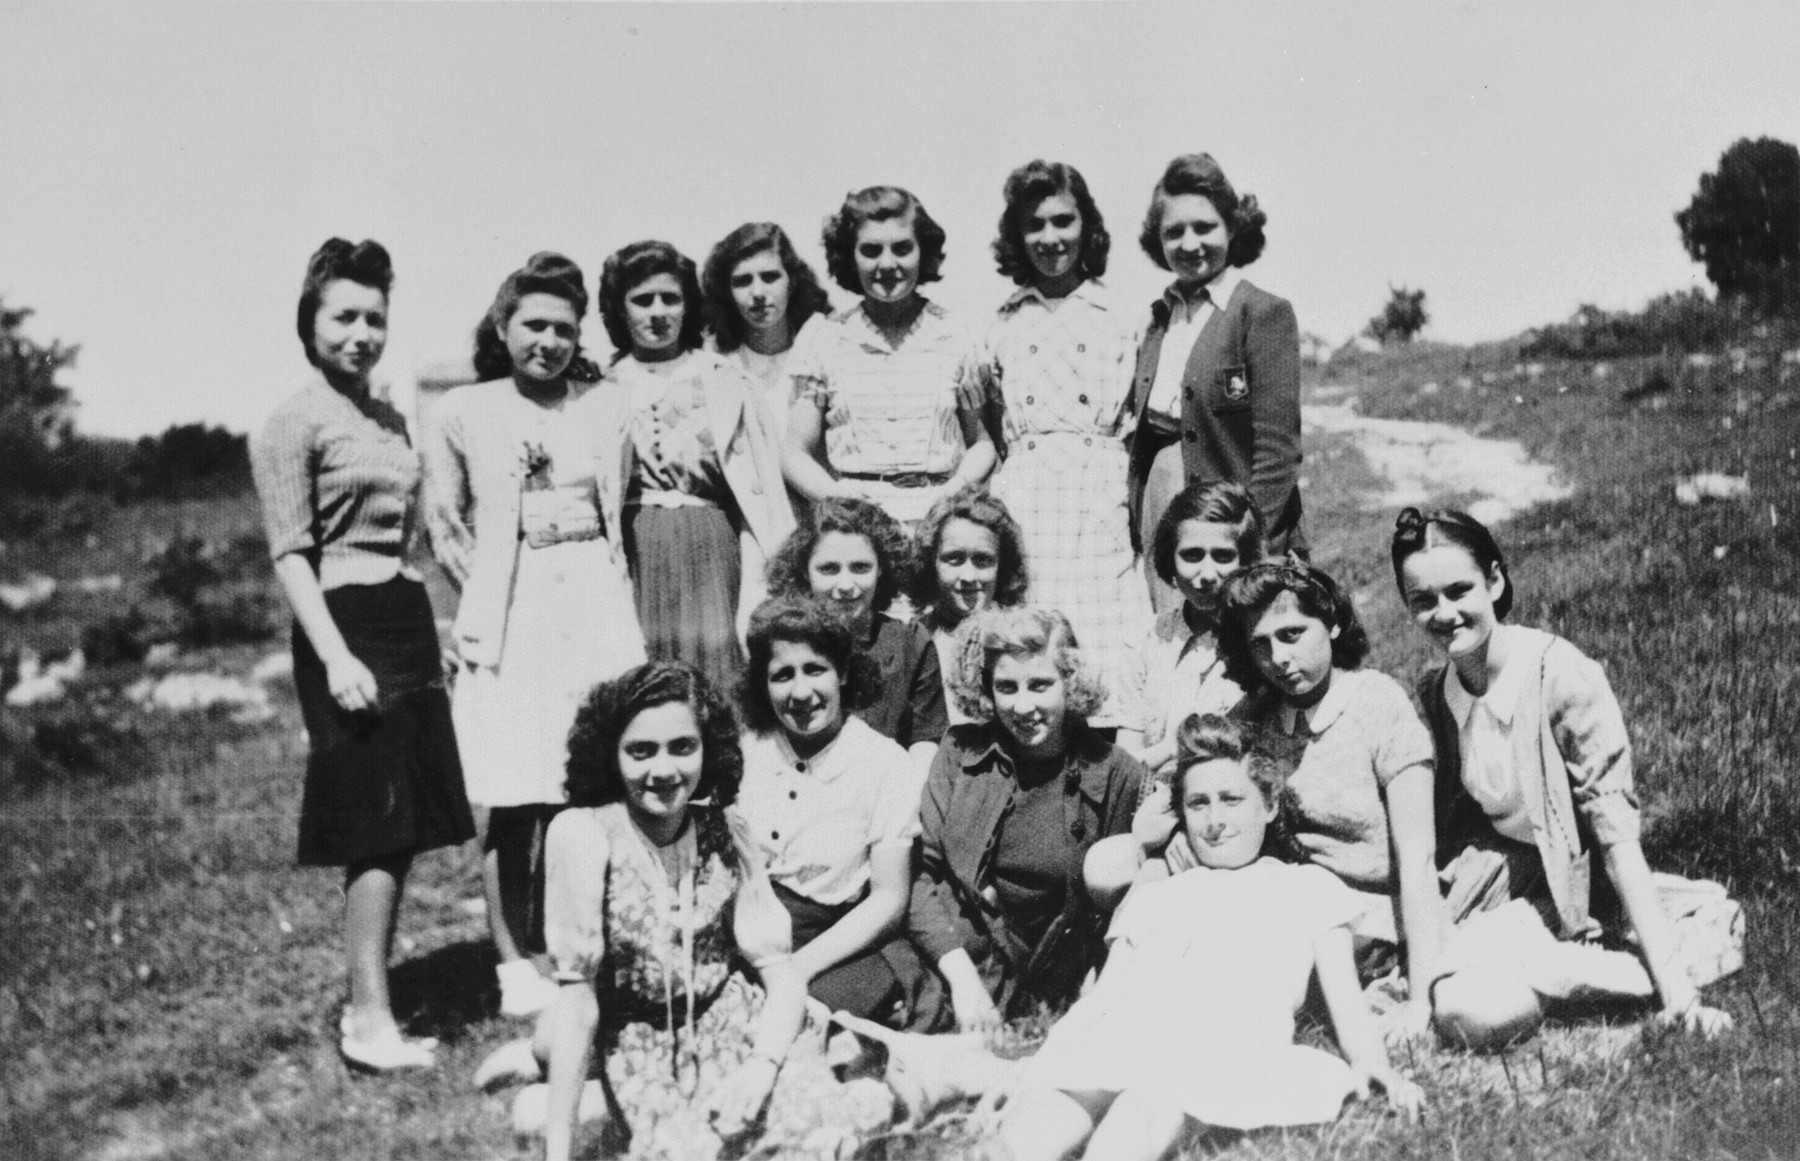 Group portrait of a girl's Latin class on an excursion.

Among those pictured is Ruth Apfel.